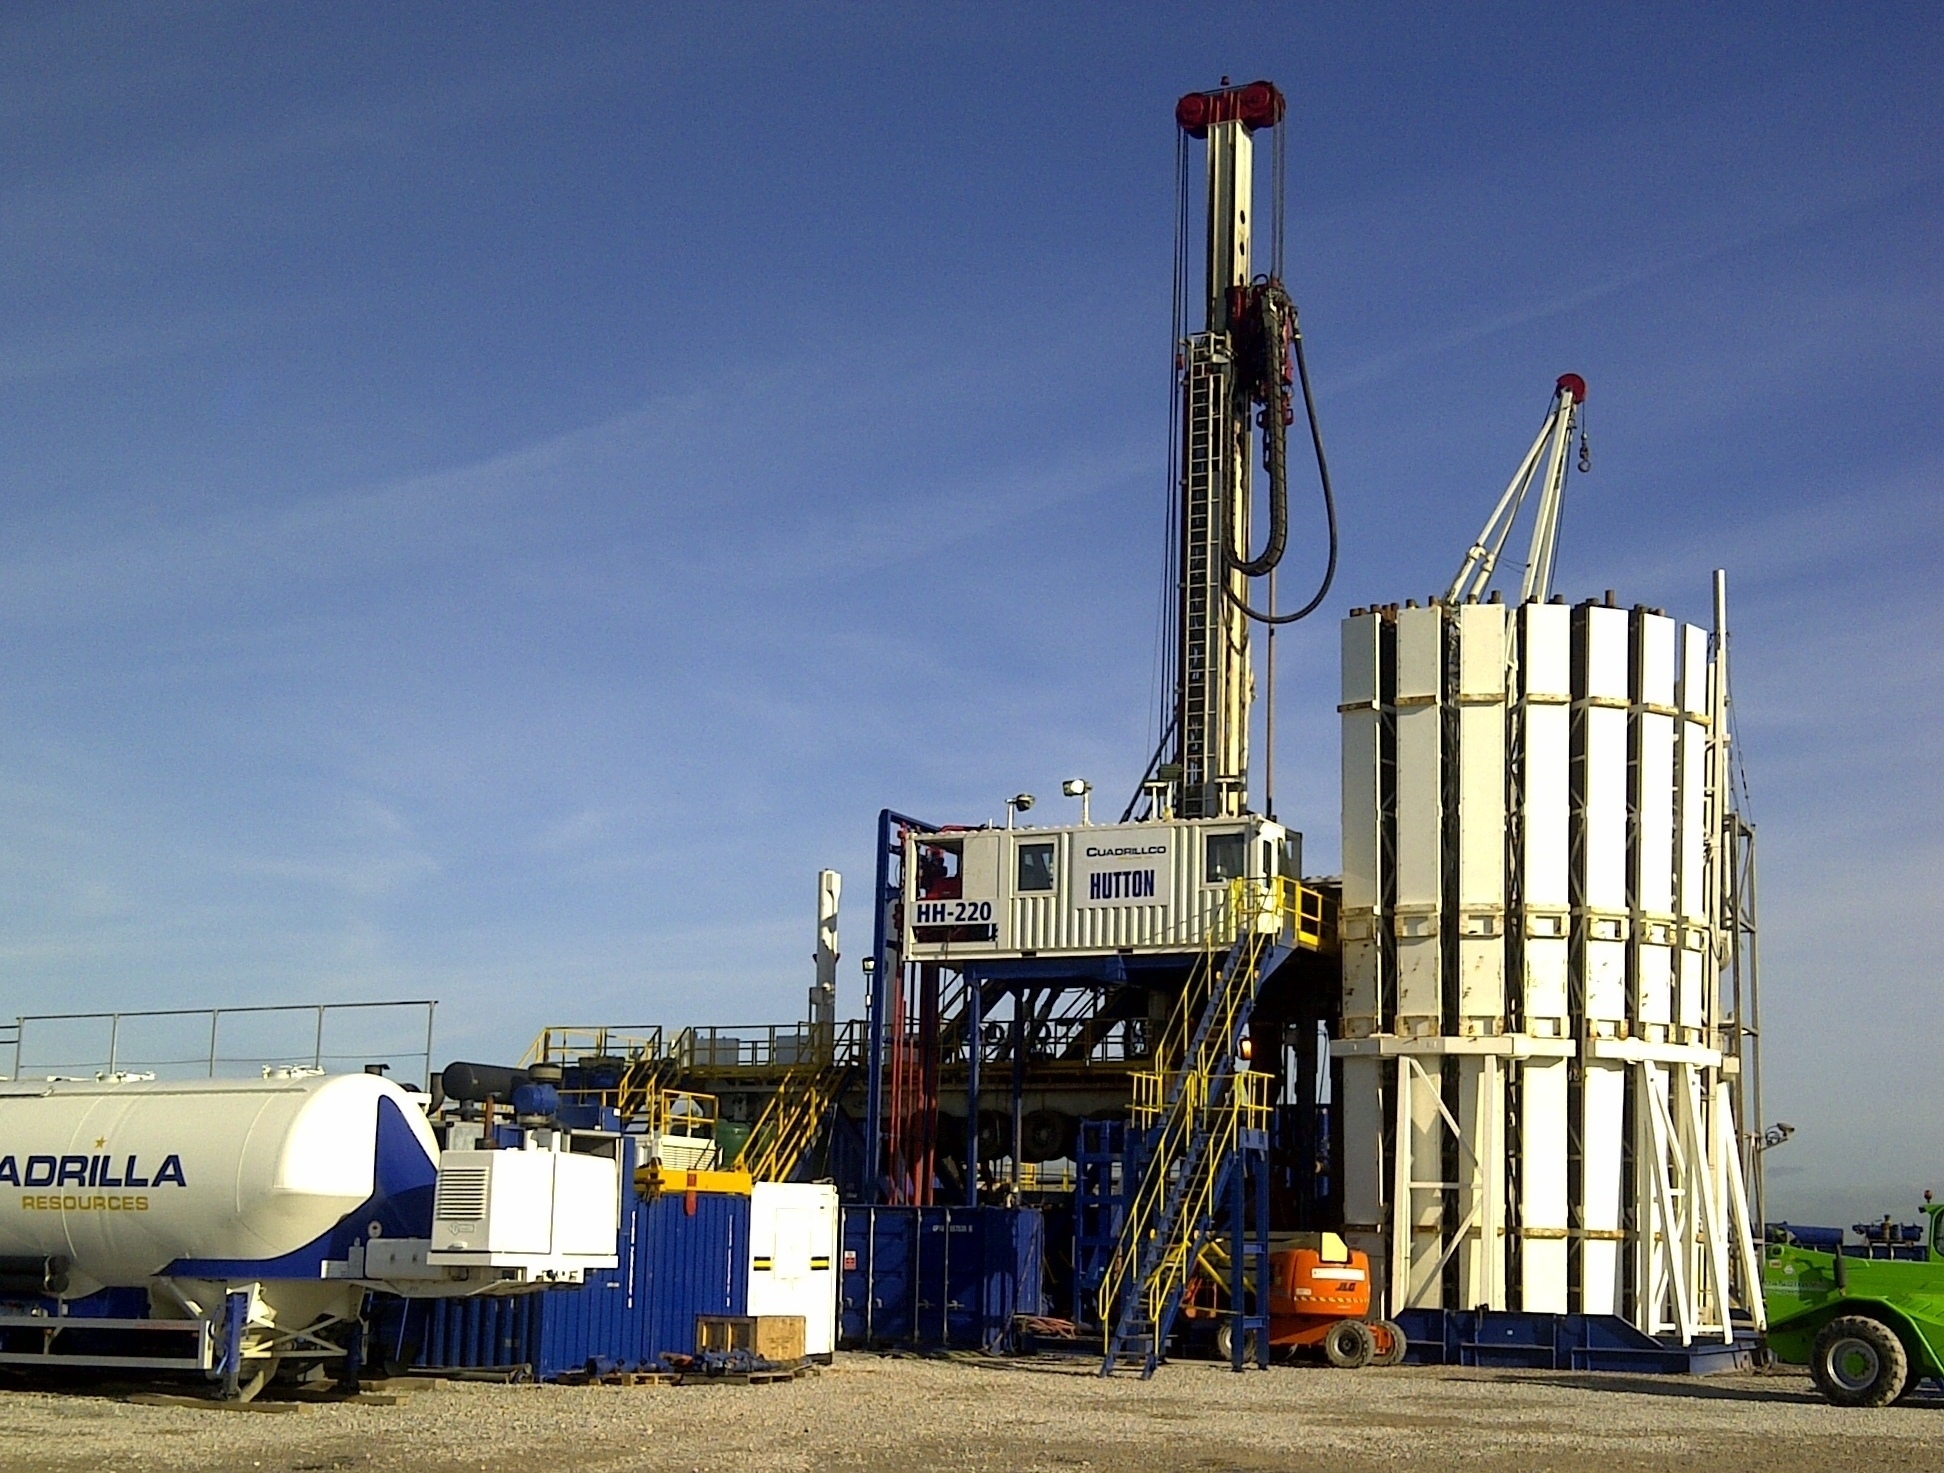 The Cuadrilla plans were rejected